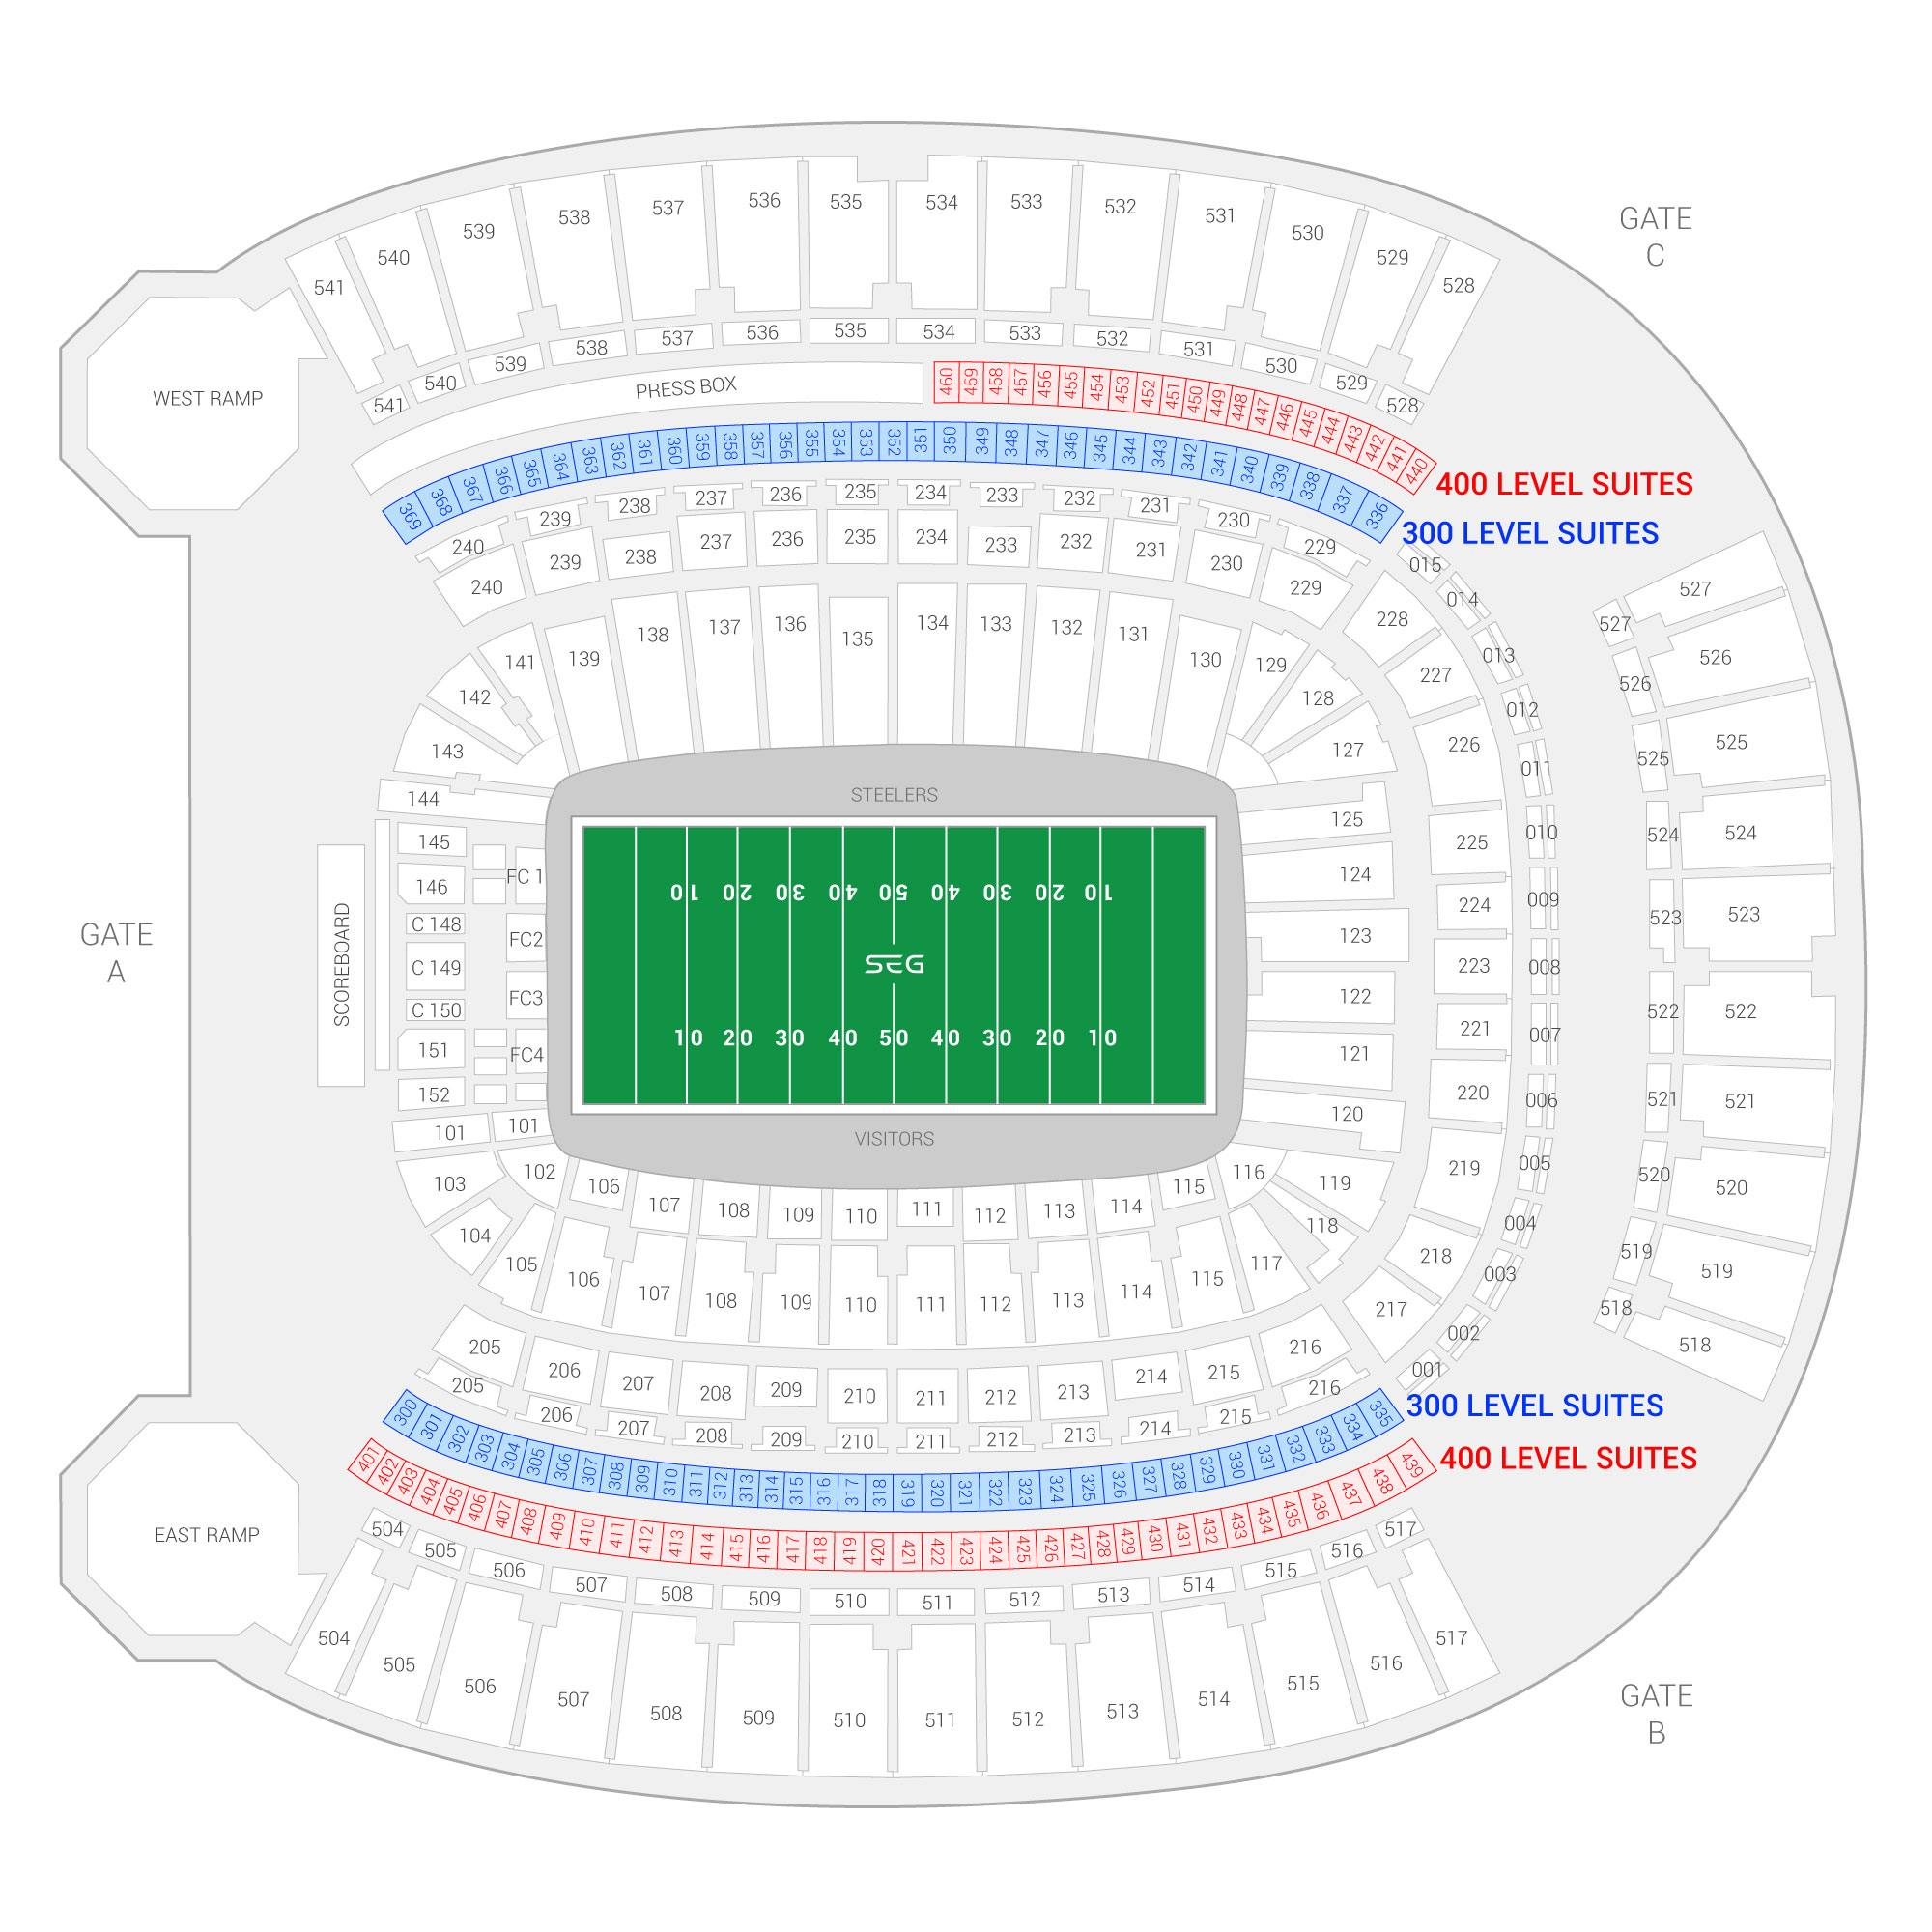 Acrisure Stadium / Pittsburgh Steelers Suite Map and Seating Chart